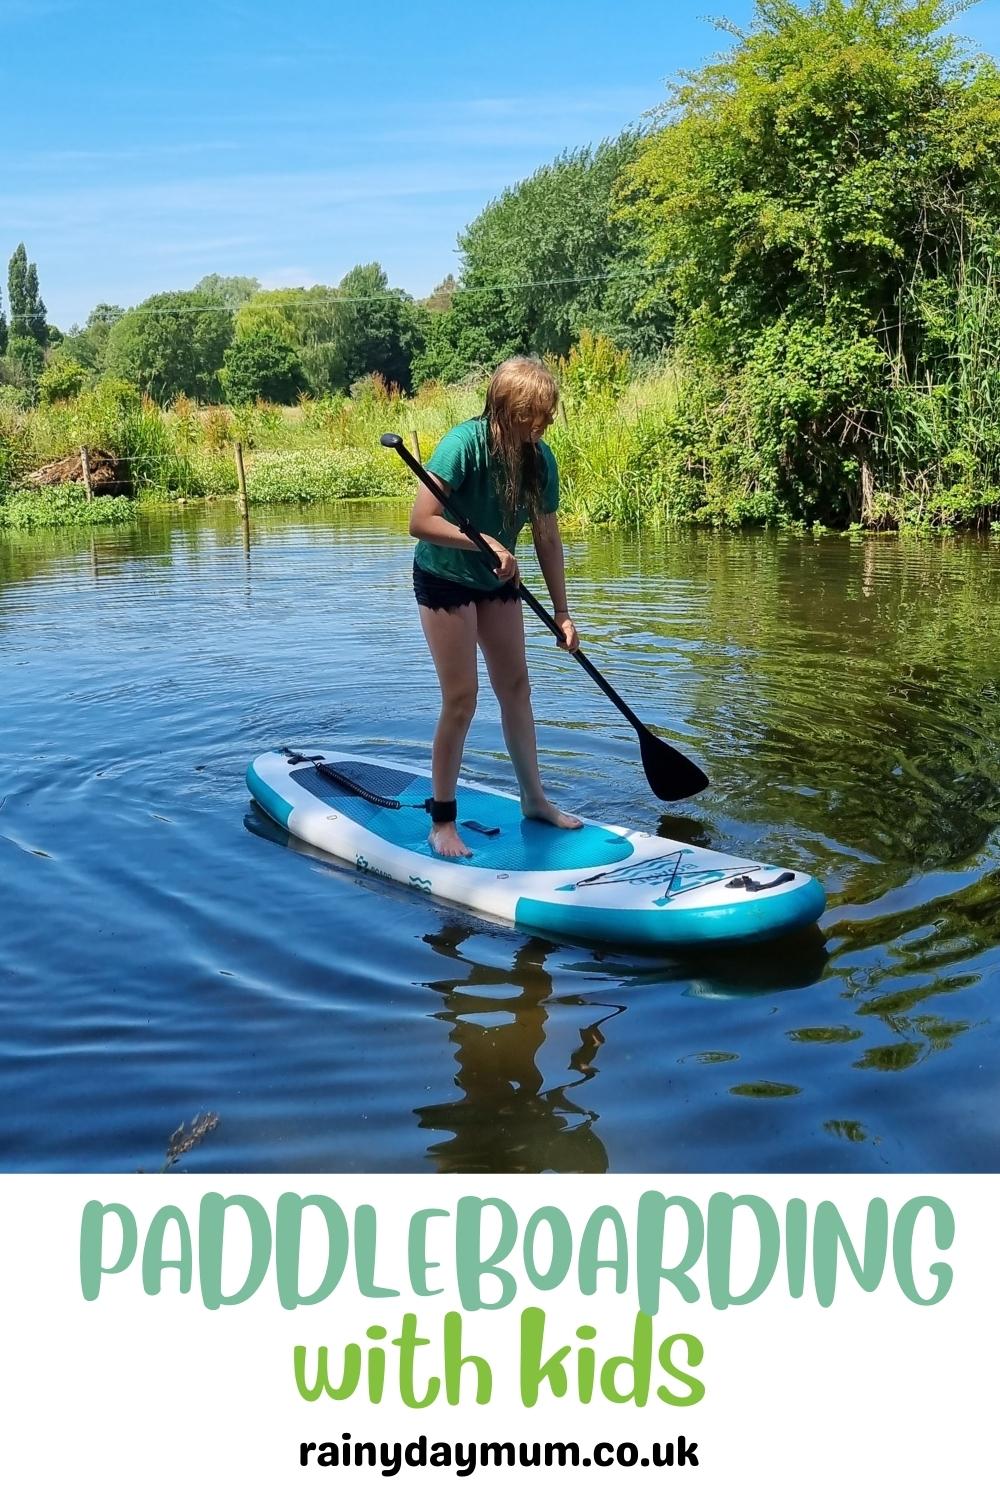 Pinterest Image for Paddleboarding with Kids from Rainy Day Mum showing a teen on a kids EZ Paddleboard perfect size for tweens and teens.